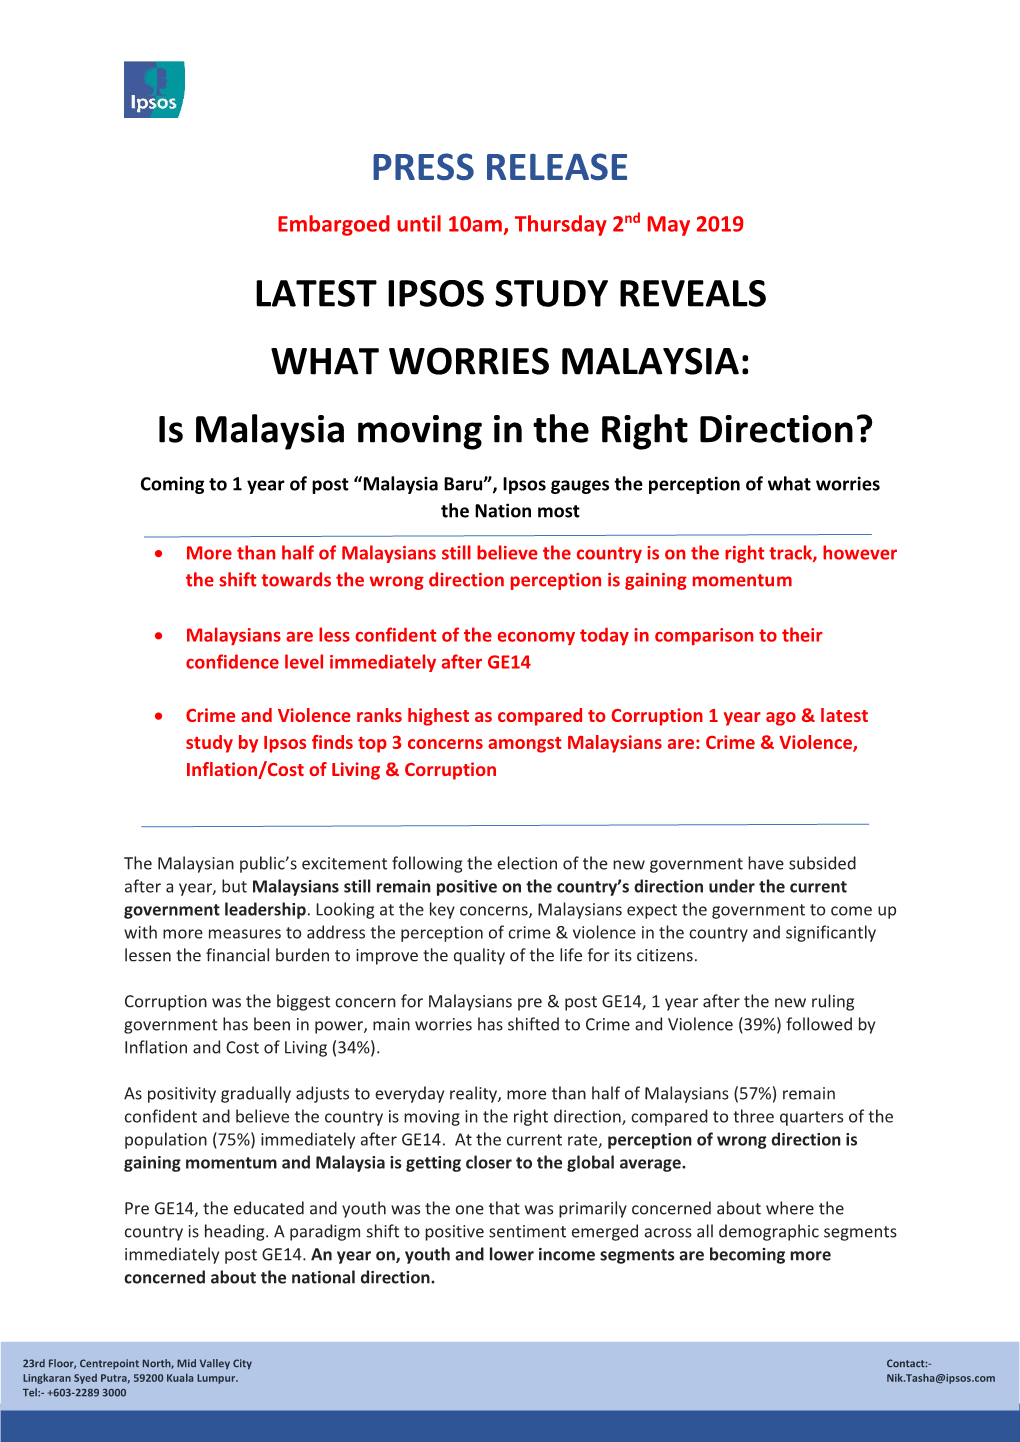 Is Malaysia Moving in the Right Direction?